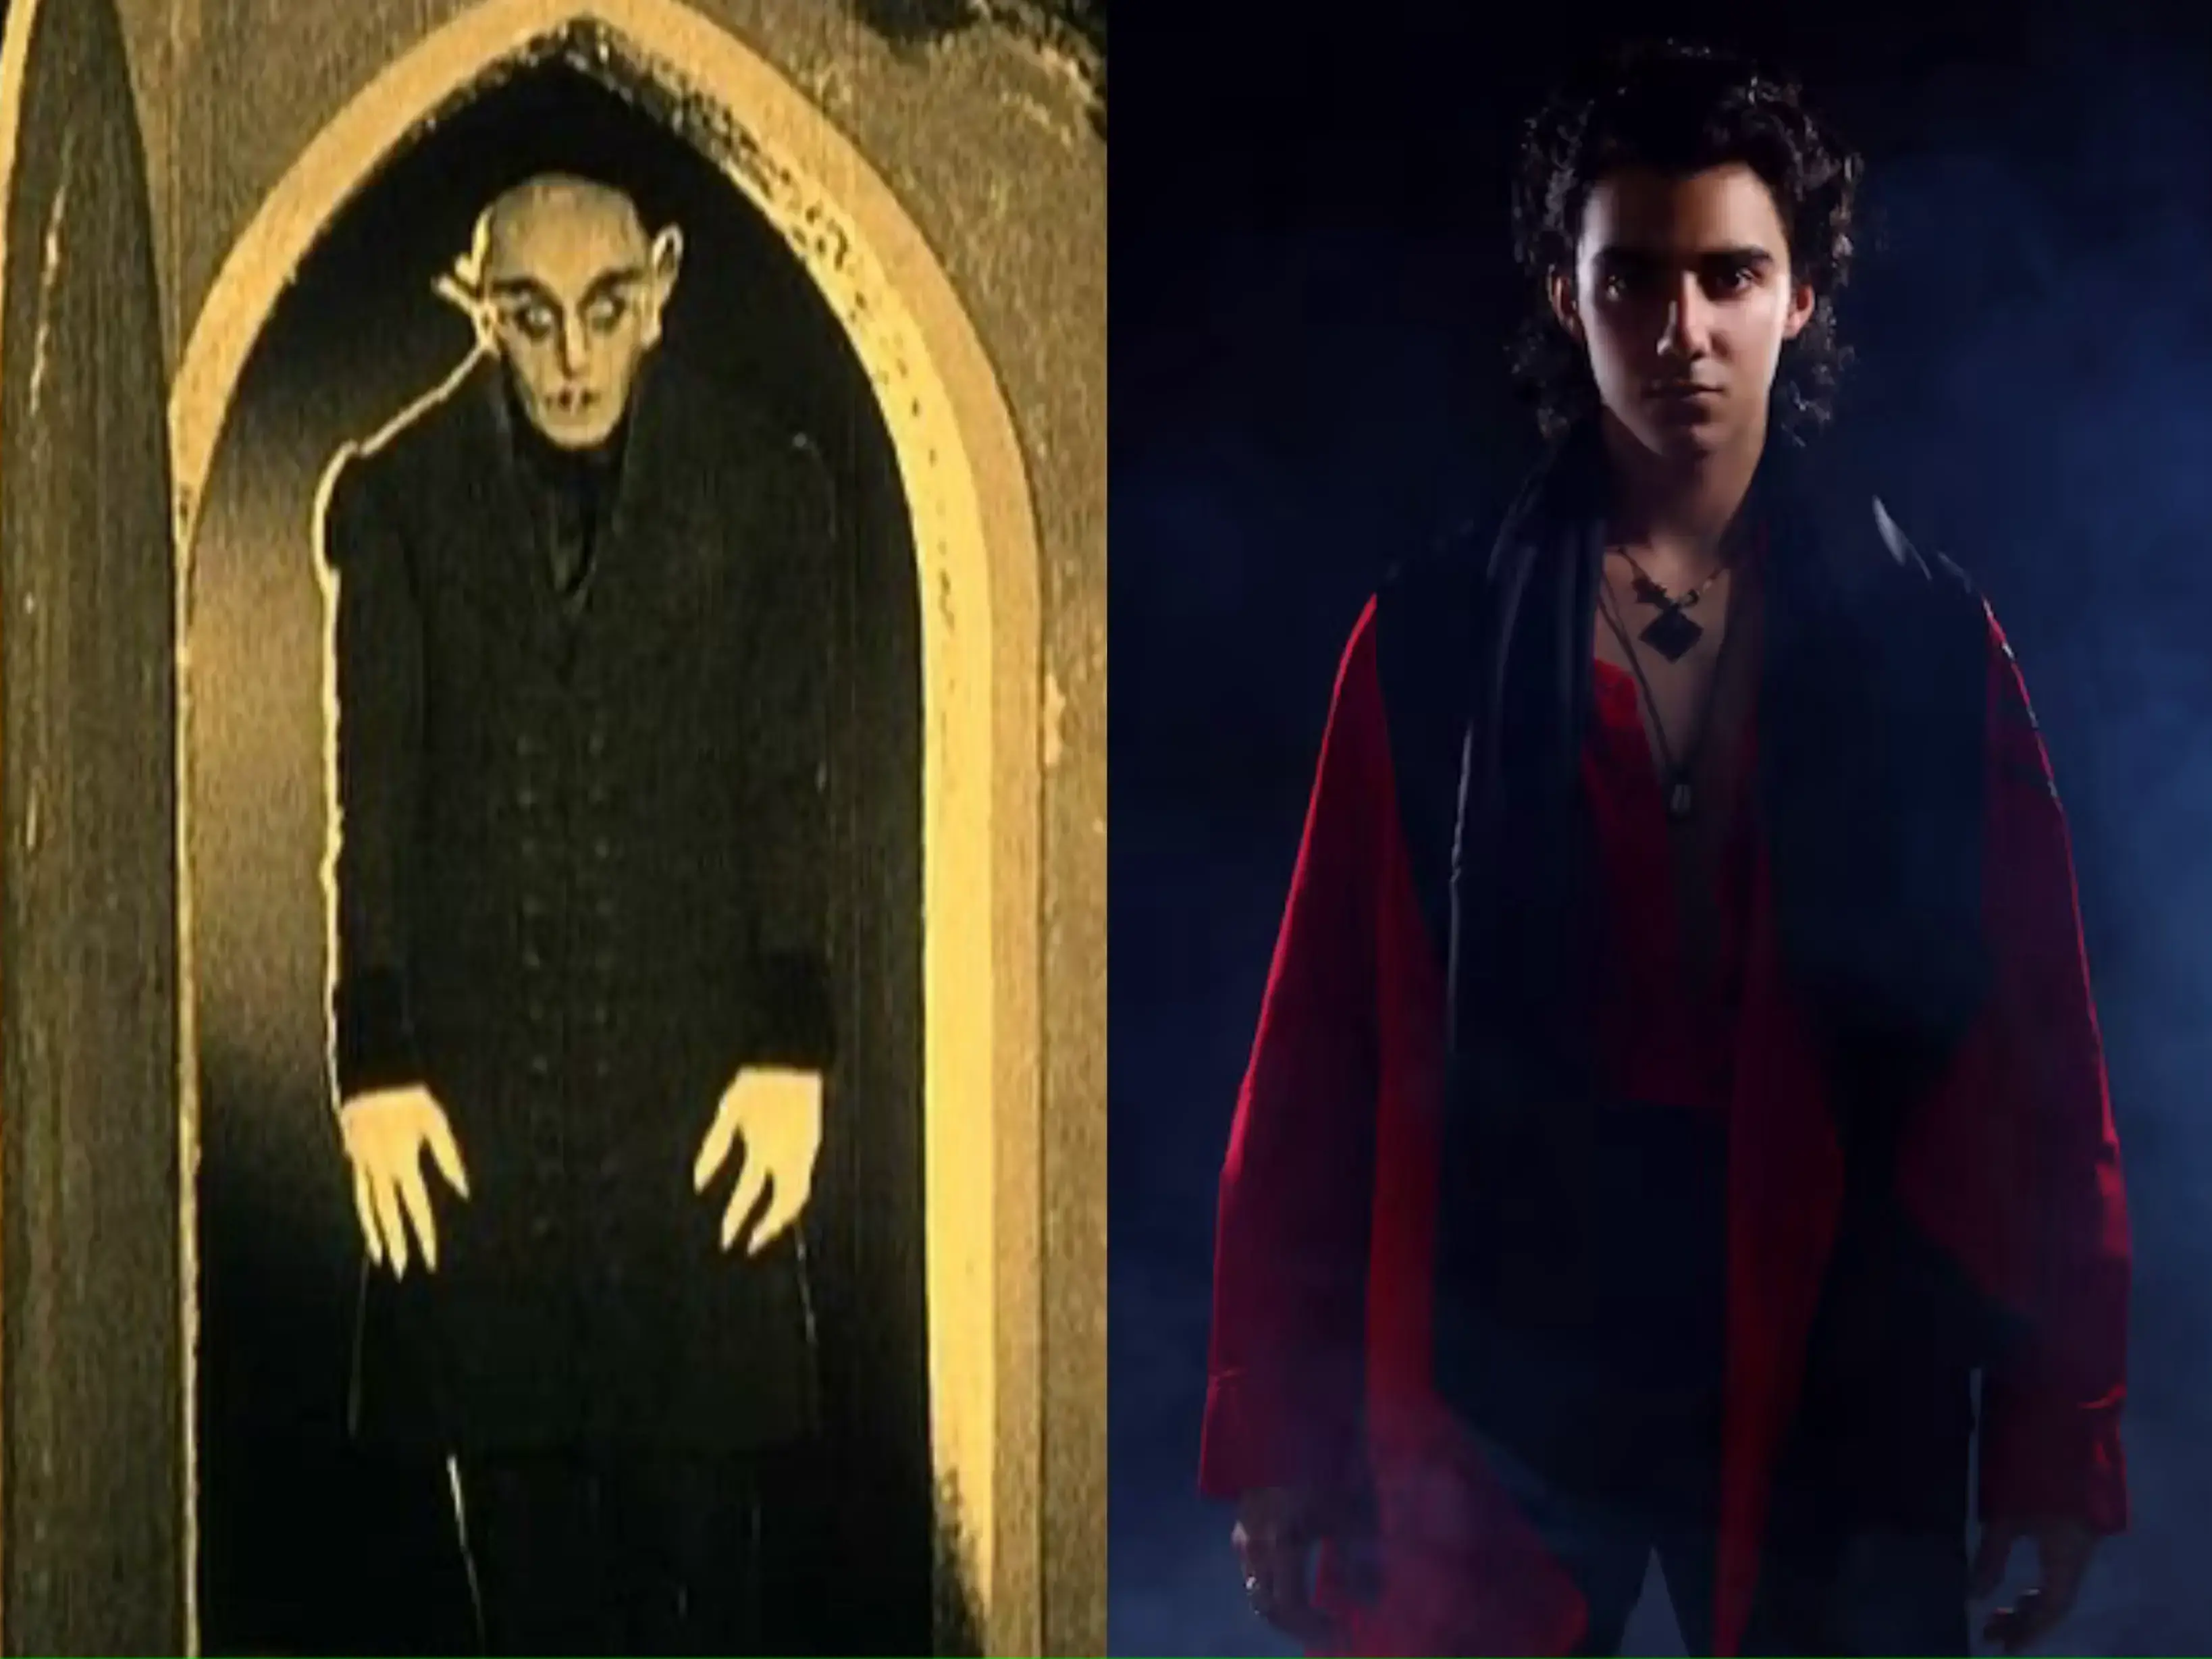 Vampire's-image-from-scary-to-handsome